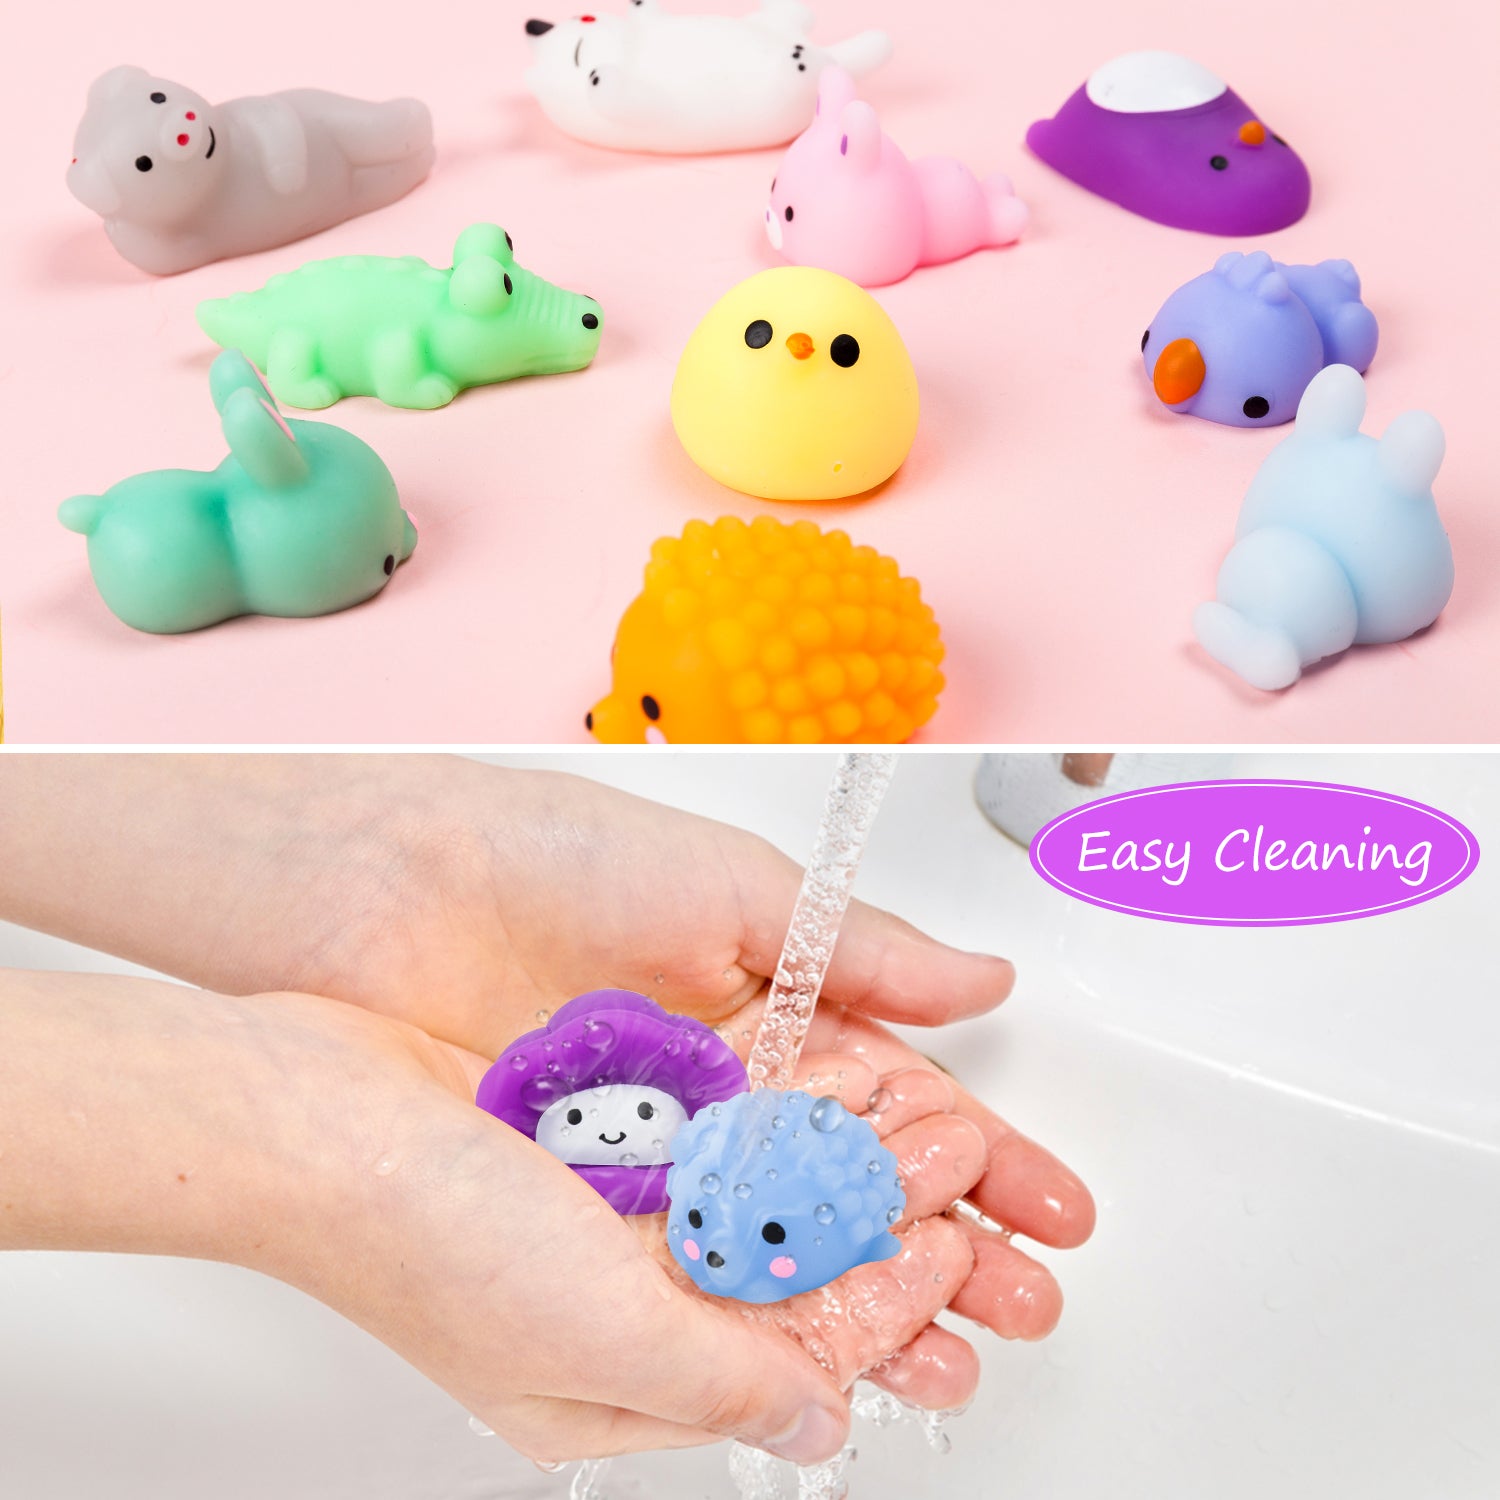 YIHONG 72 Pcs Kawaii Squishies, Mochi Squishy Toys for Kids Party Favors,  Mini Stress Relief Toys for Christmas Party Favors, Classroom Prizes